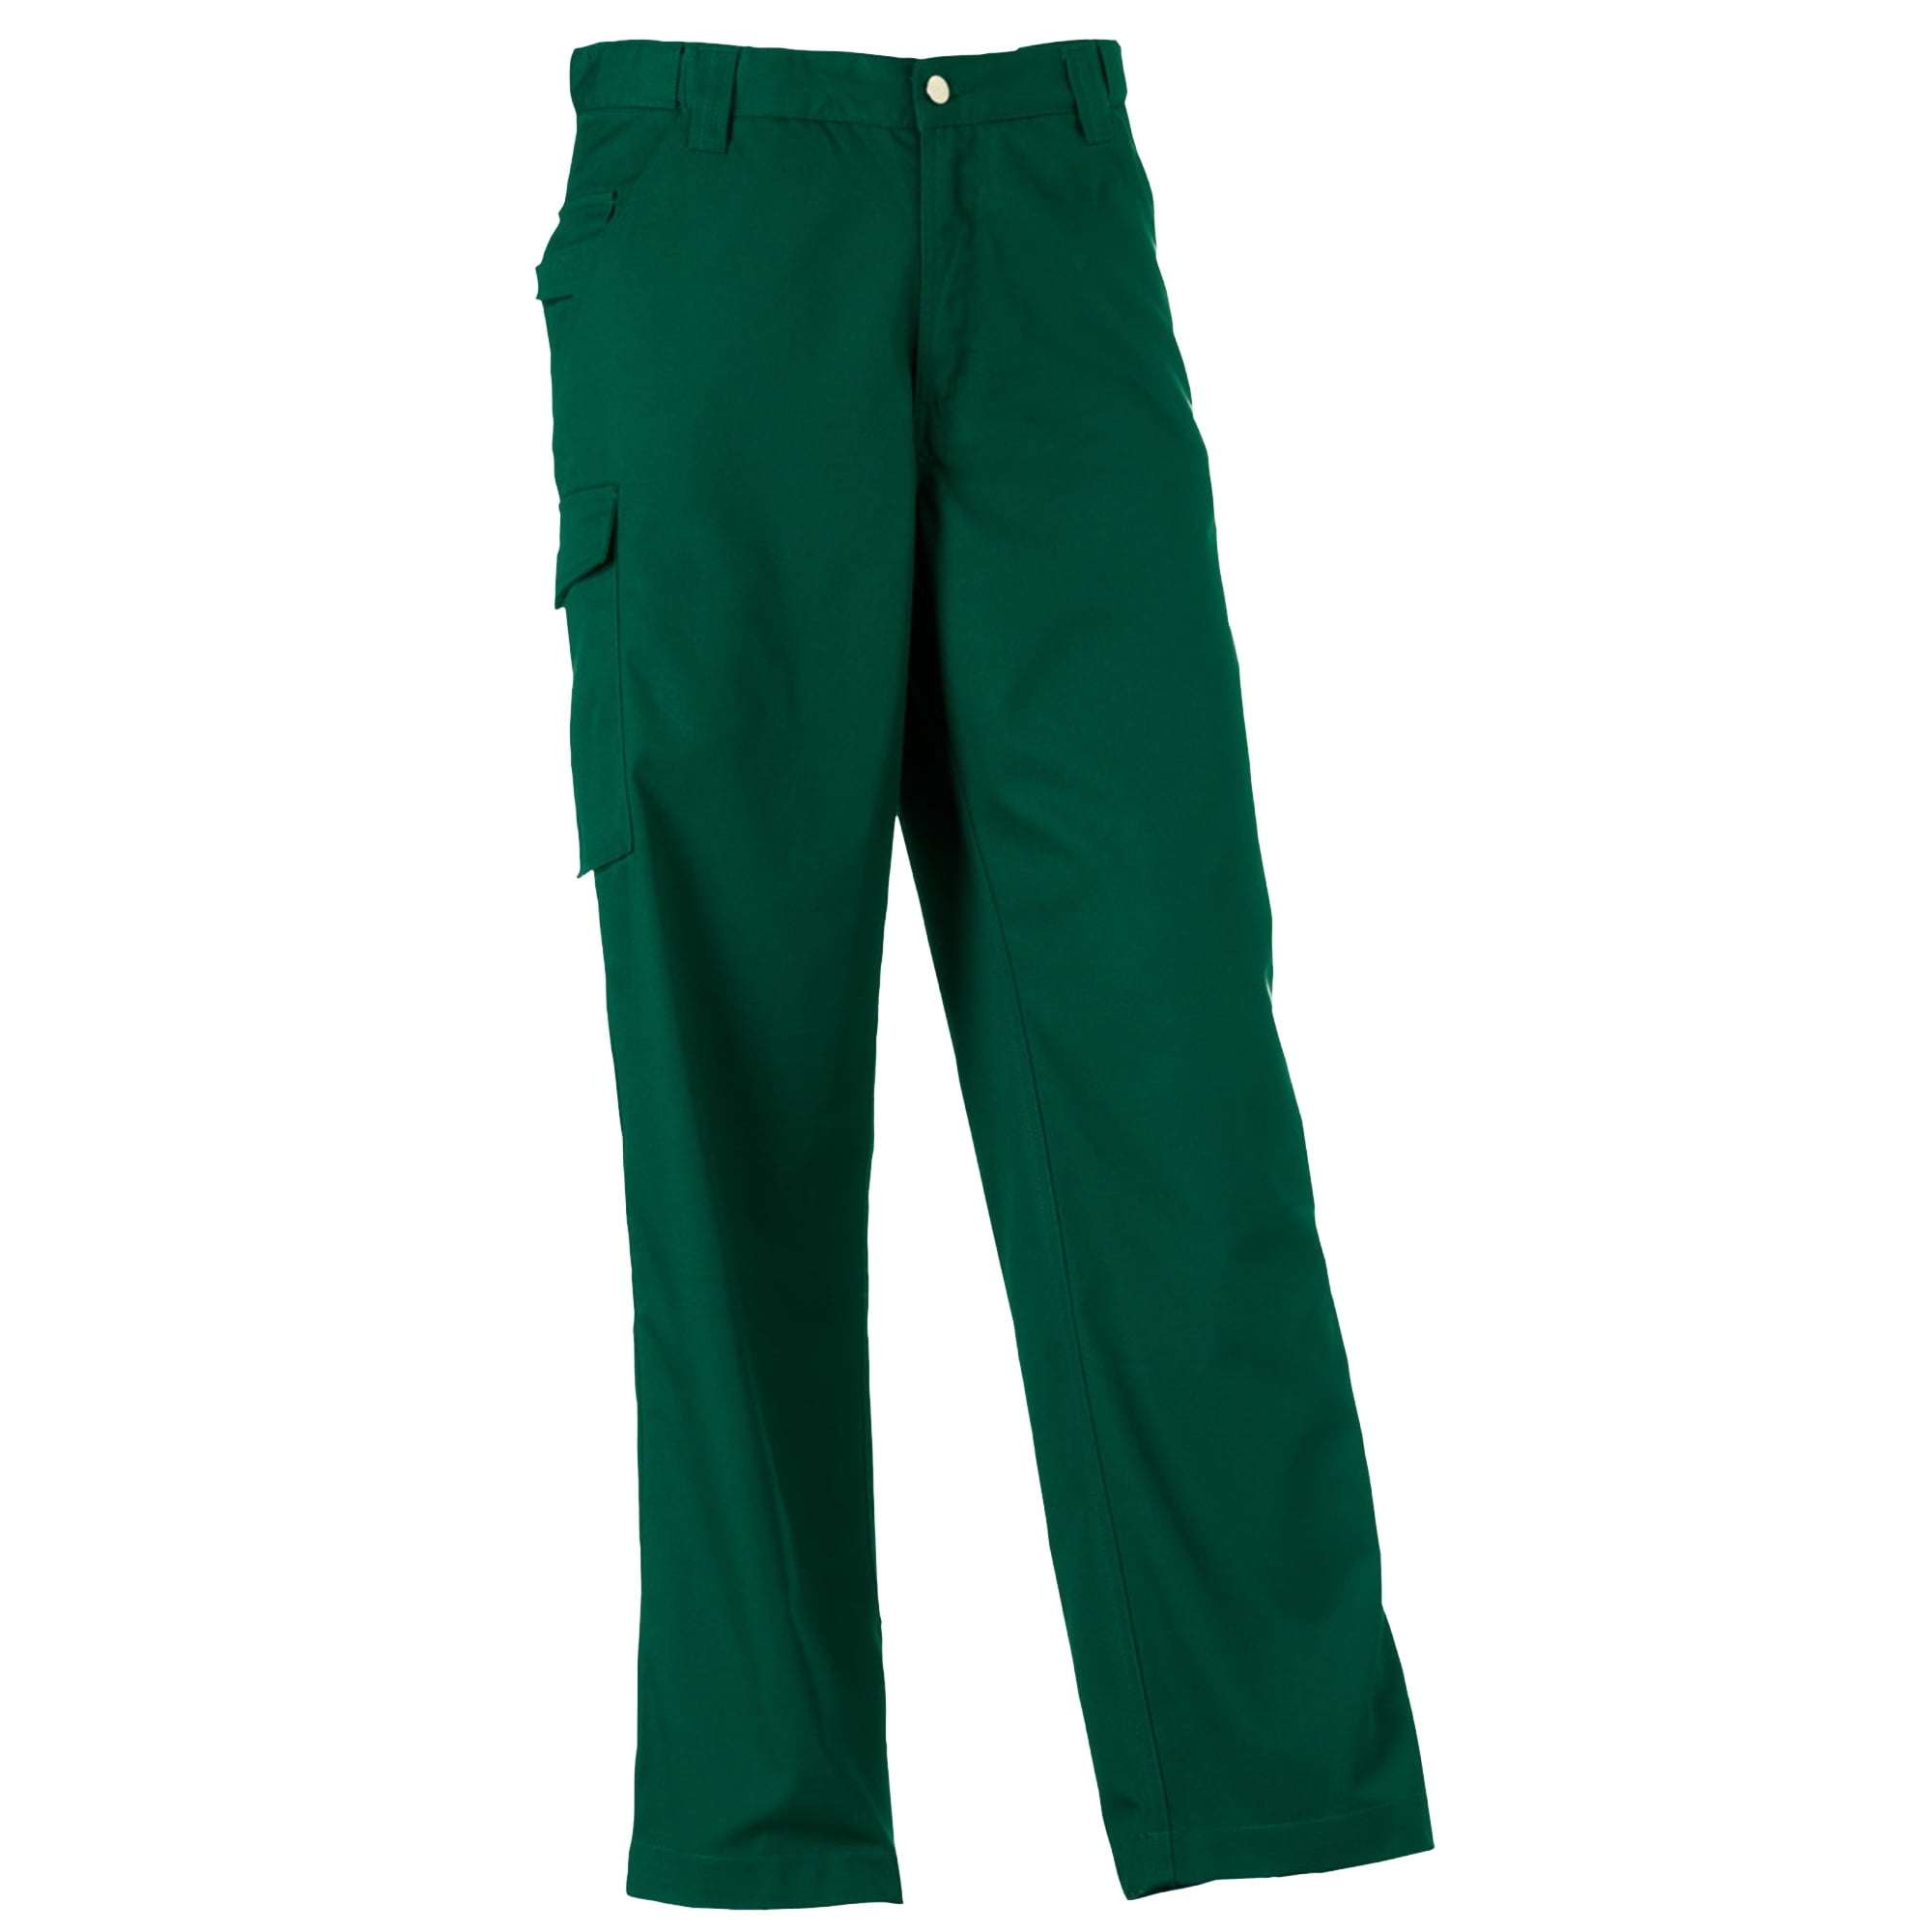 Russell Workwear Mens Polycotton Twill Trouser / Pants (Regular ...